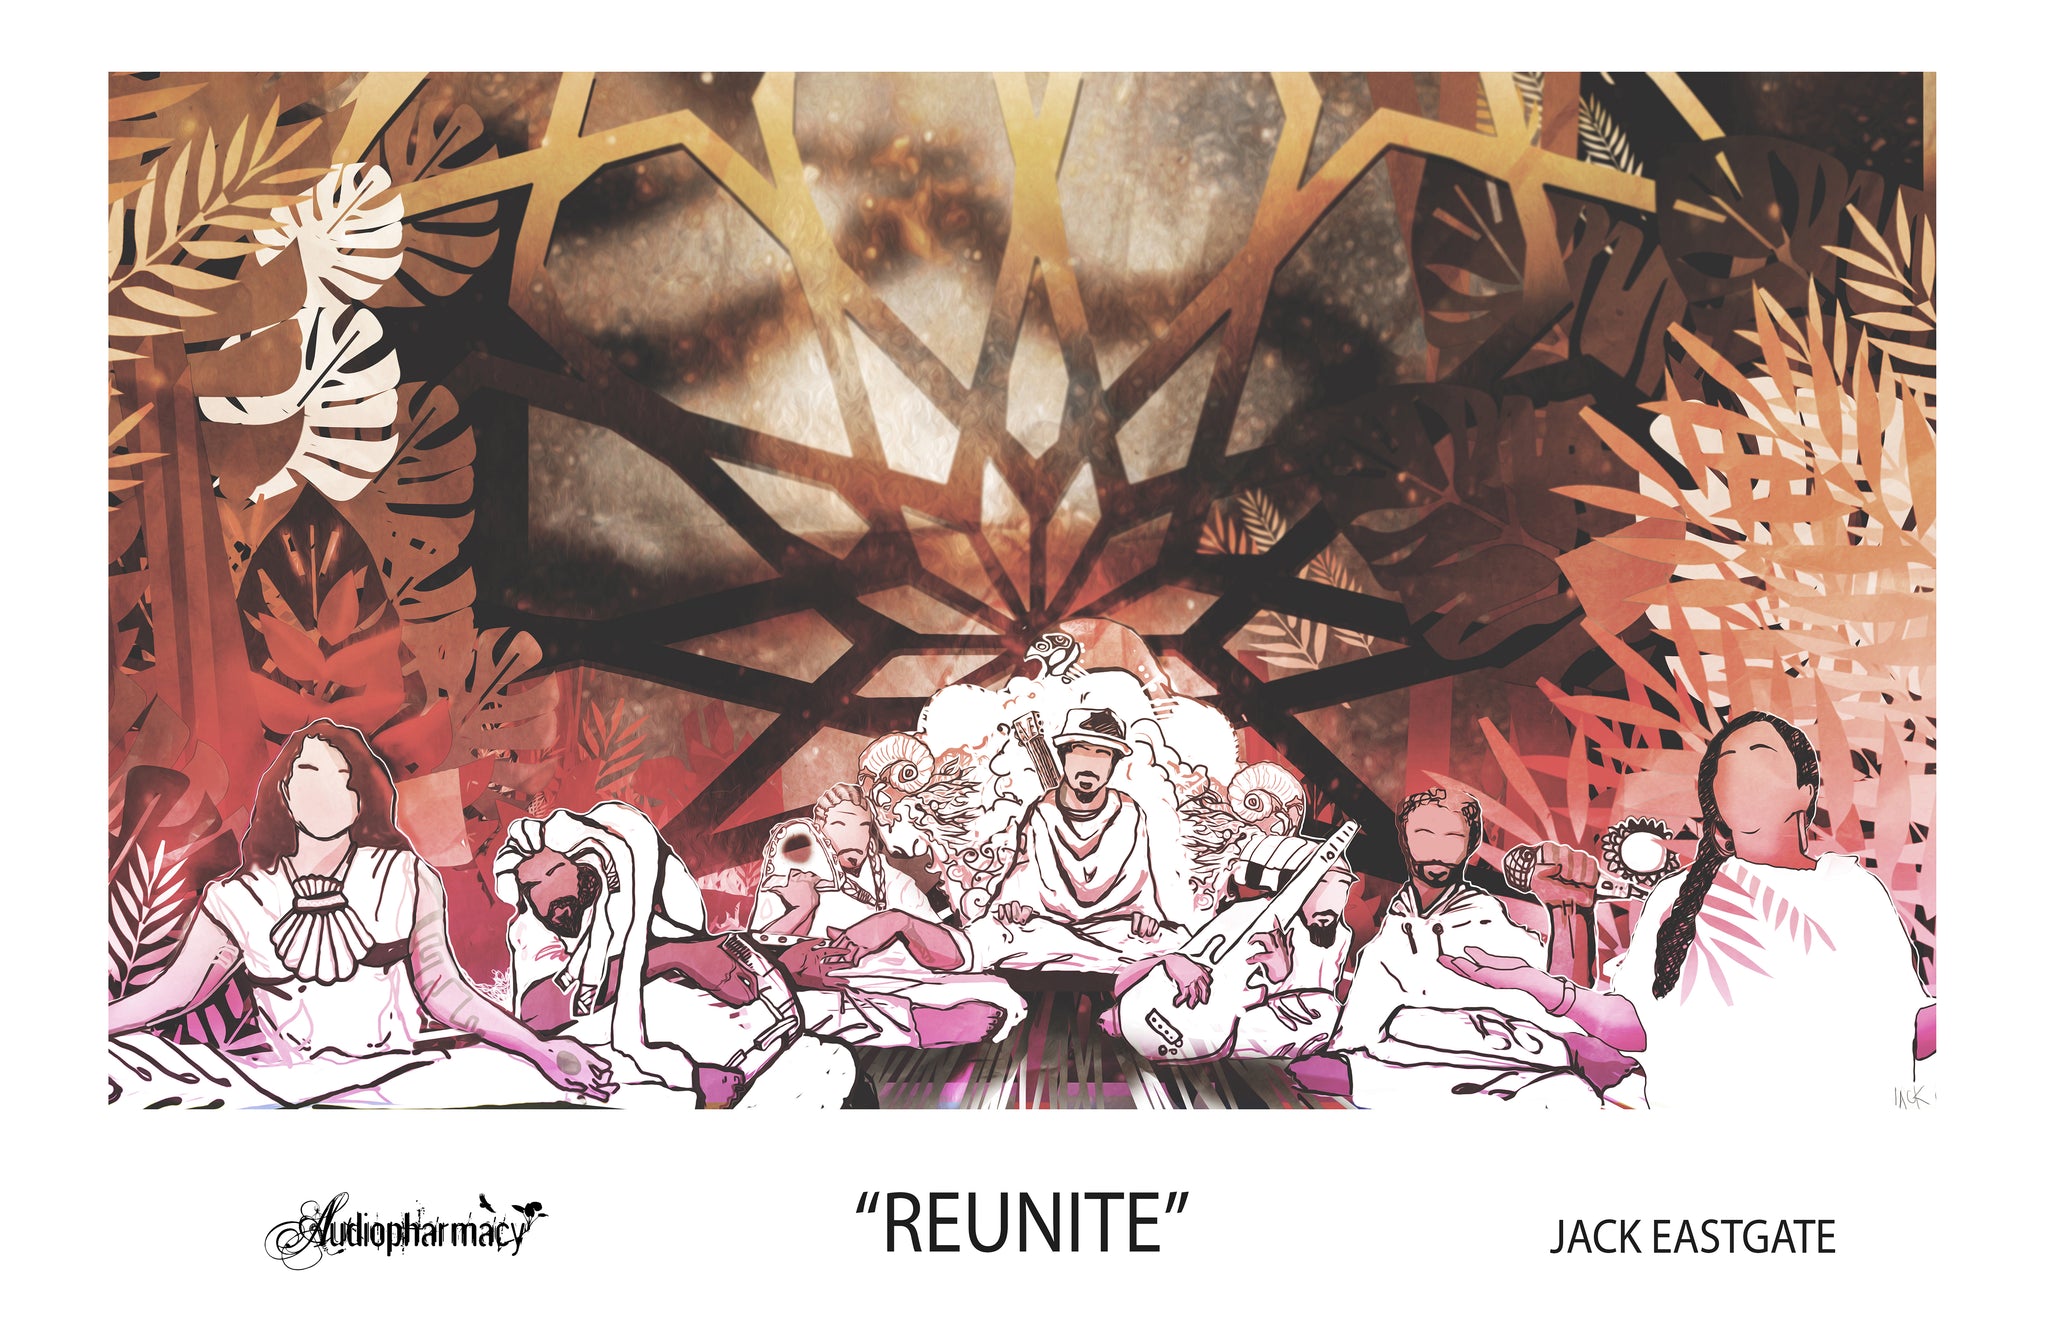 MOMENT - "REUNITE" POSTER BY JACK EASTGATE